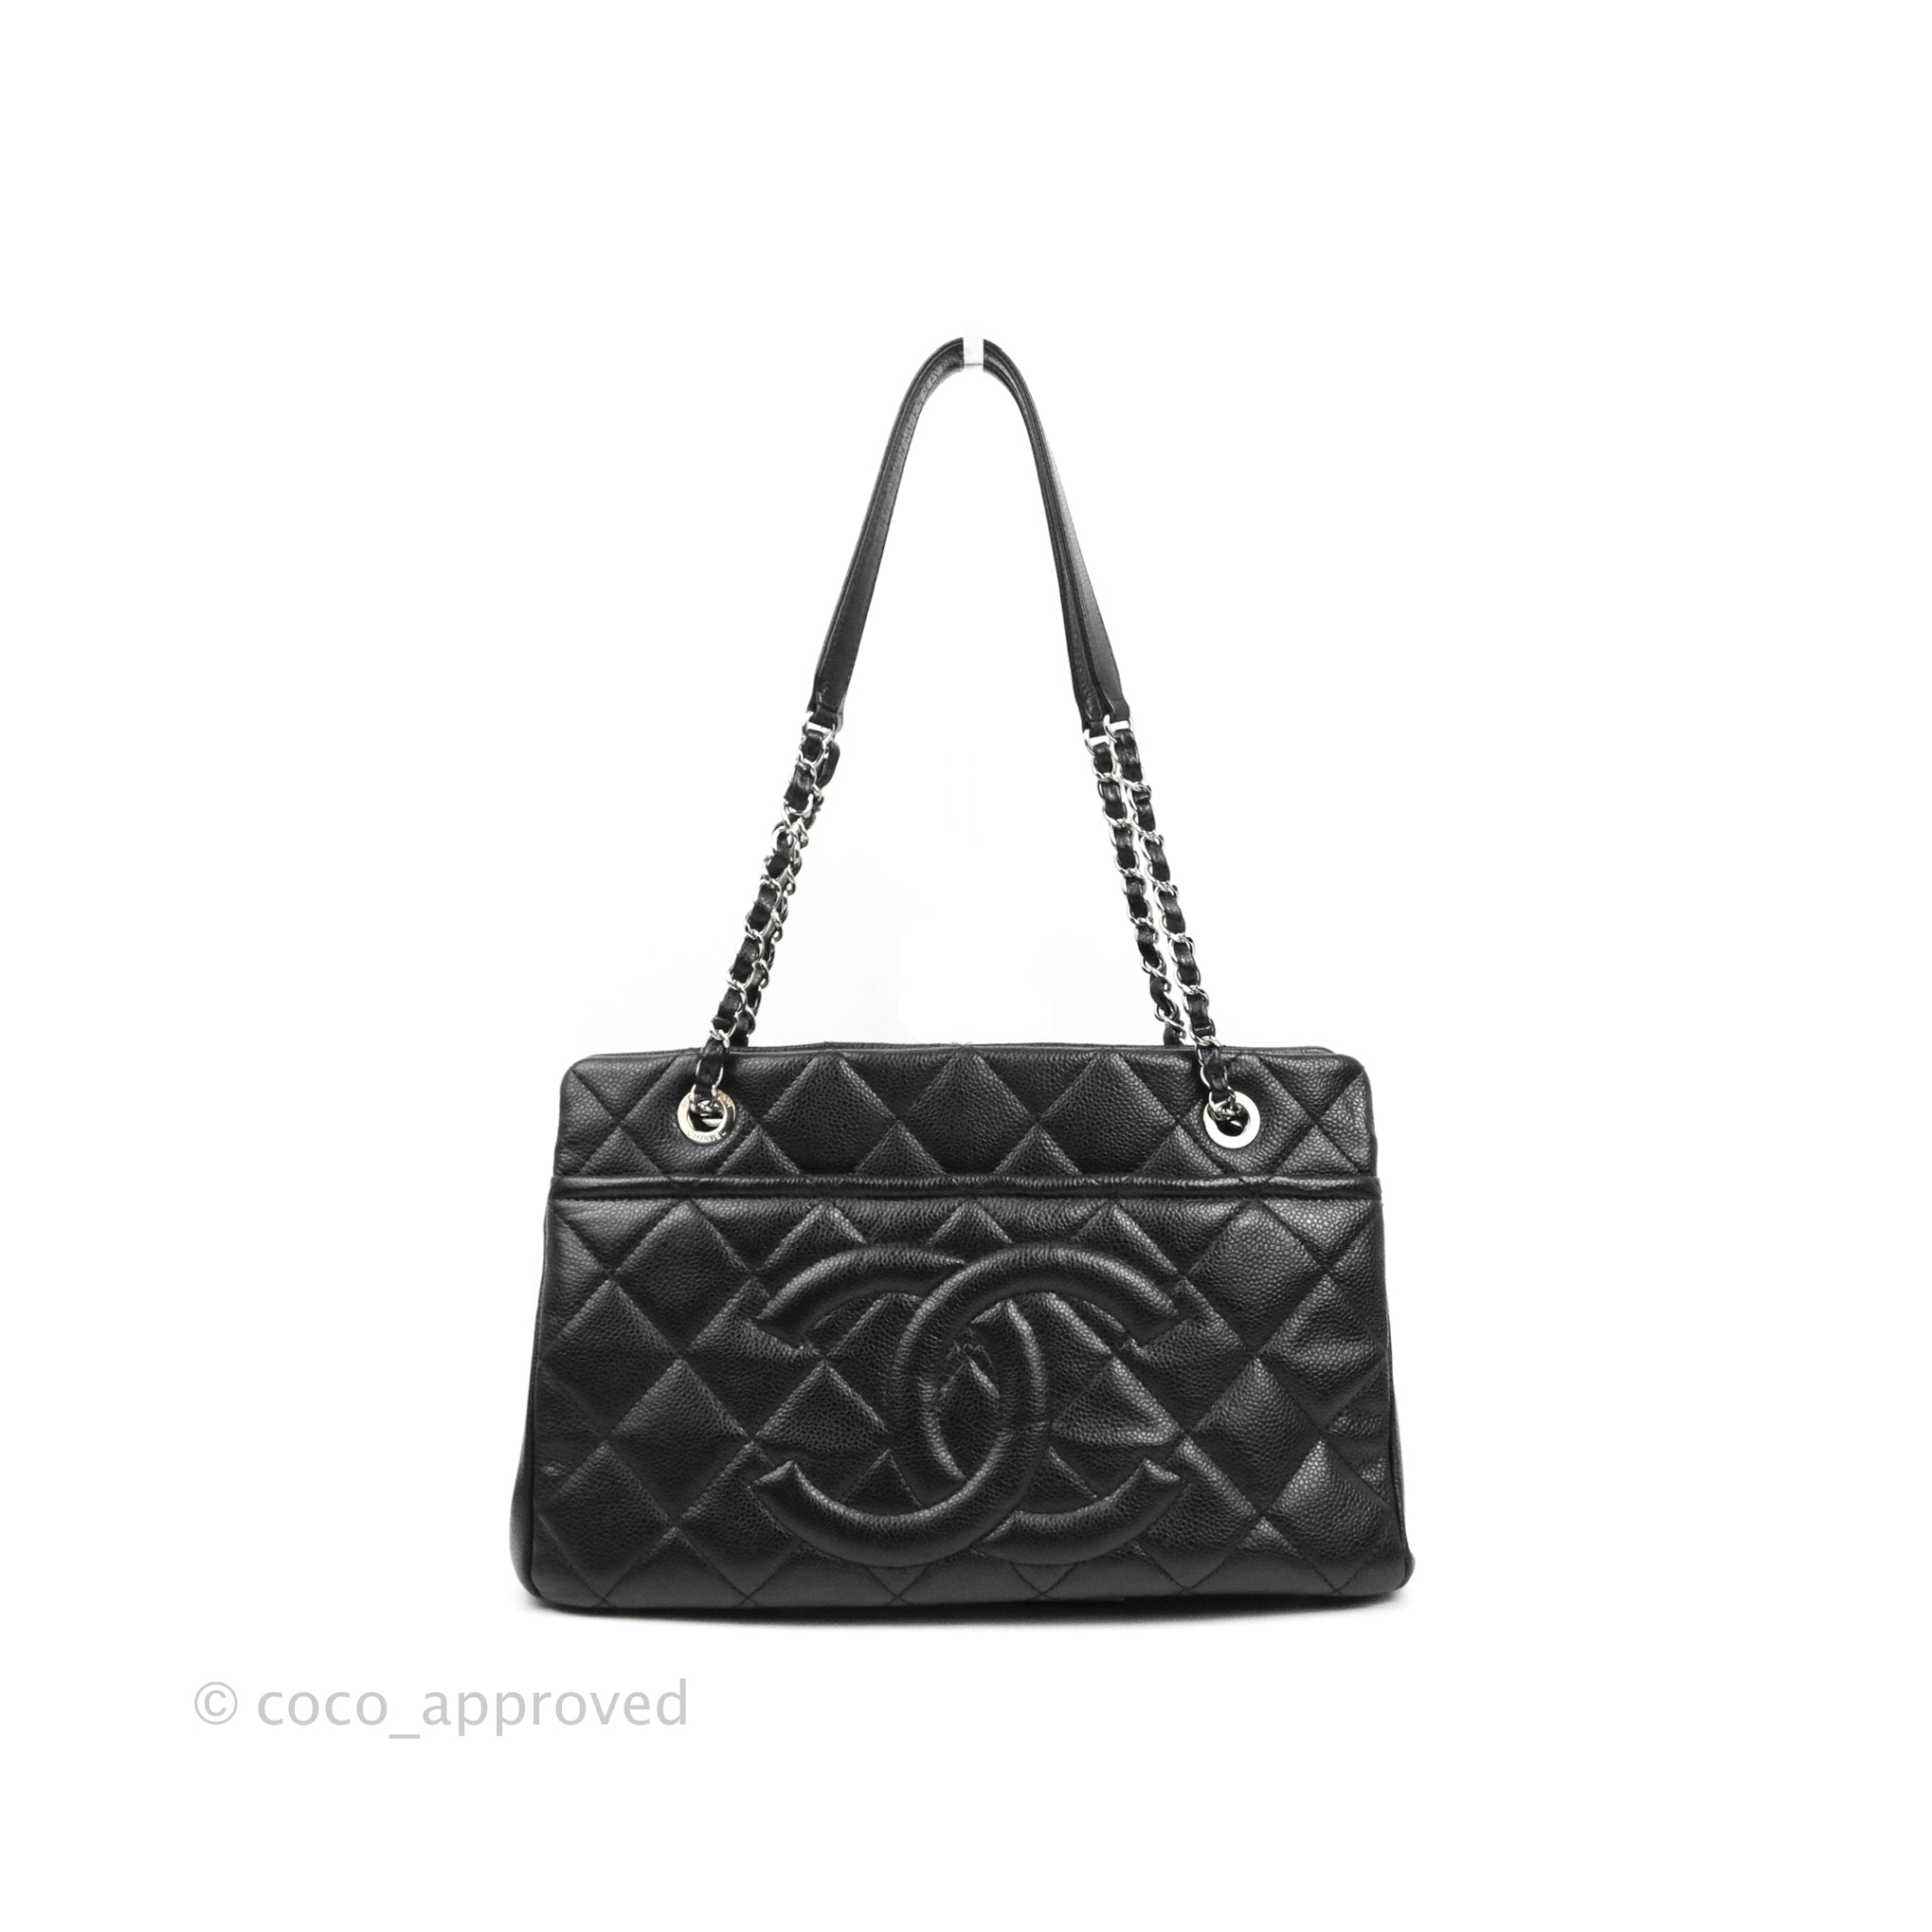 Chanel Grand Soft Shopper Tote in Black Quilted Calfskin with